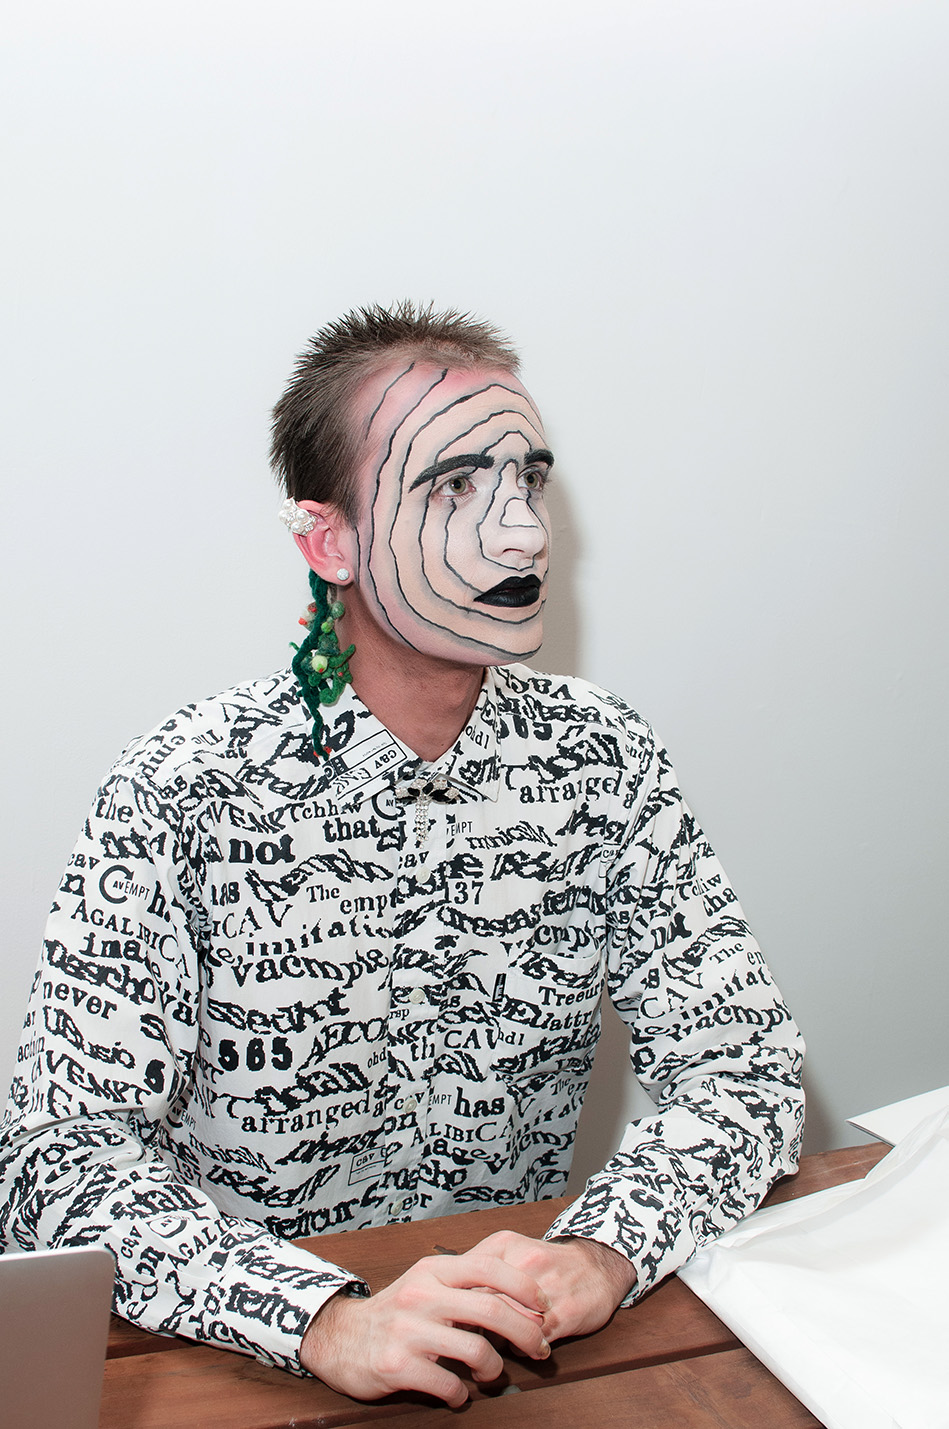 Jesse seated at a table with concentric circles drawn on his face wearing a patterned shirt against a white wall